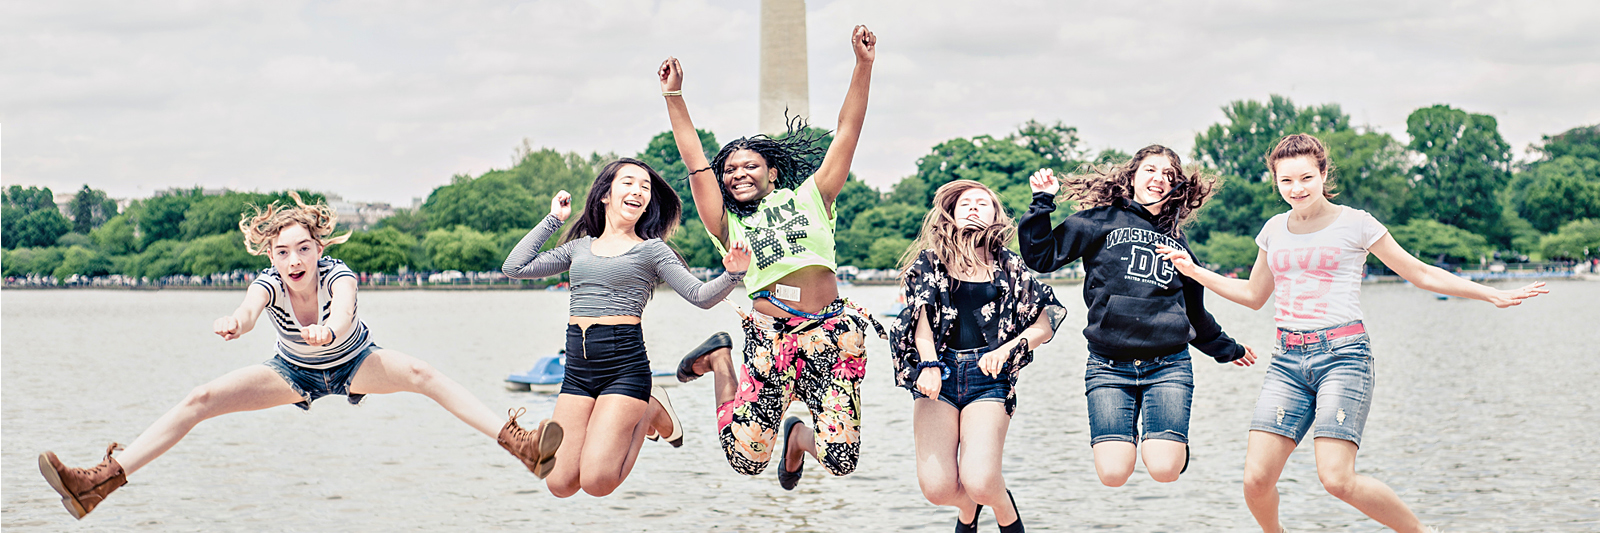 WDC_Attraction_Youth_Washington monument